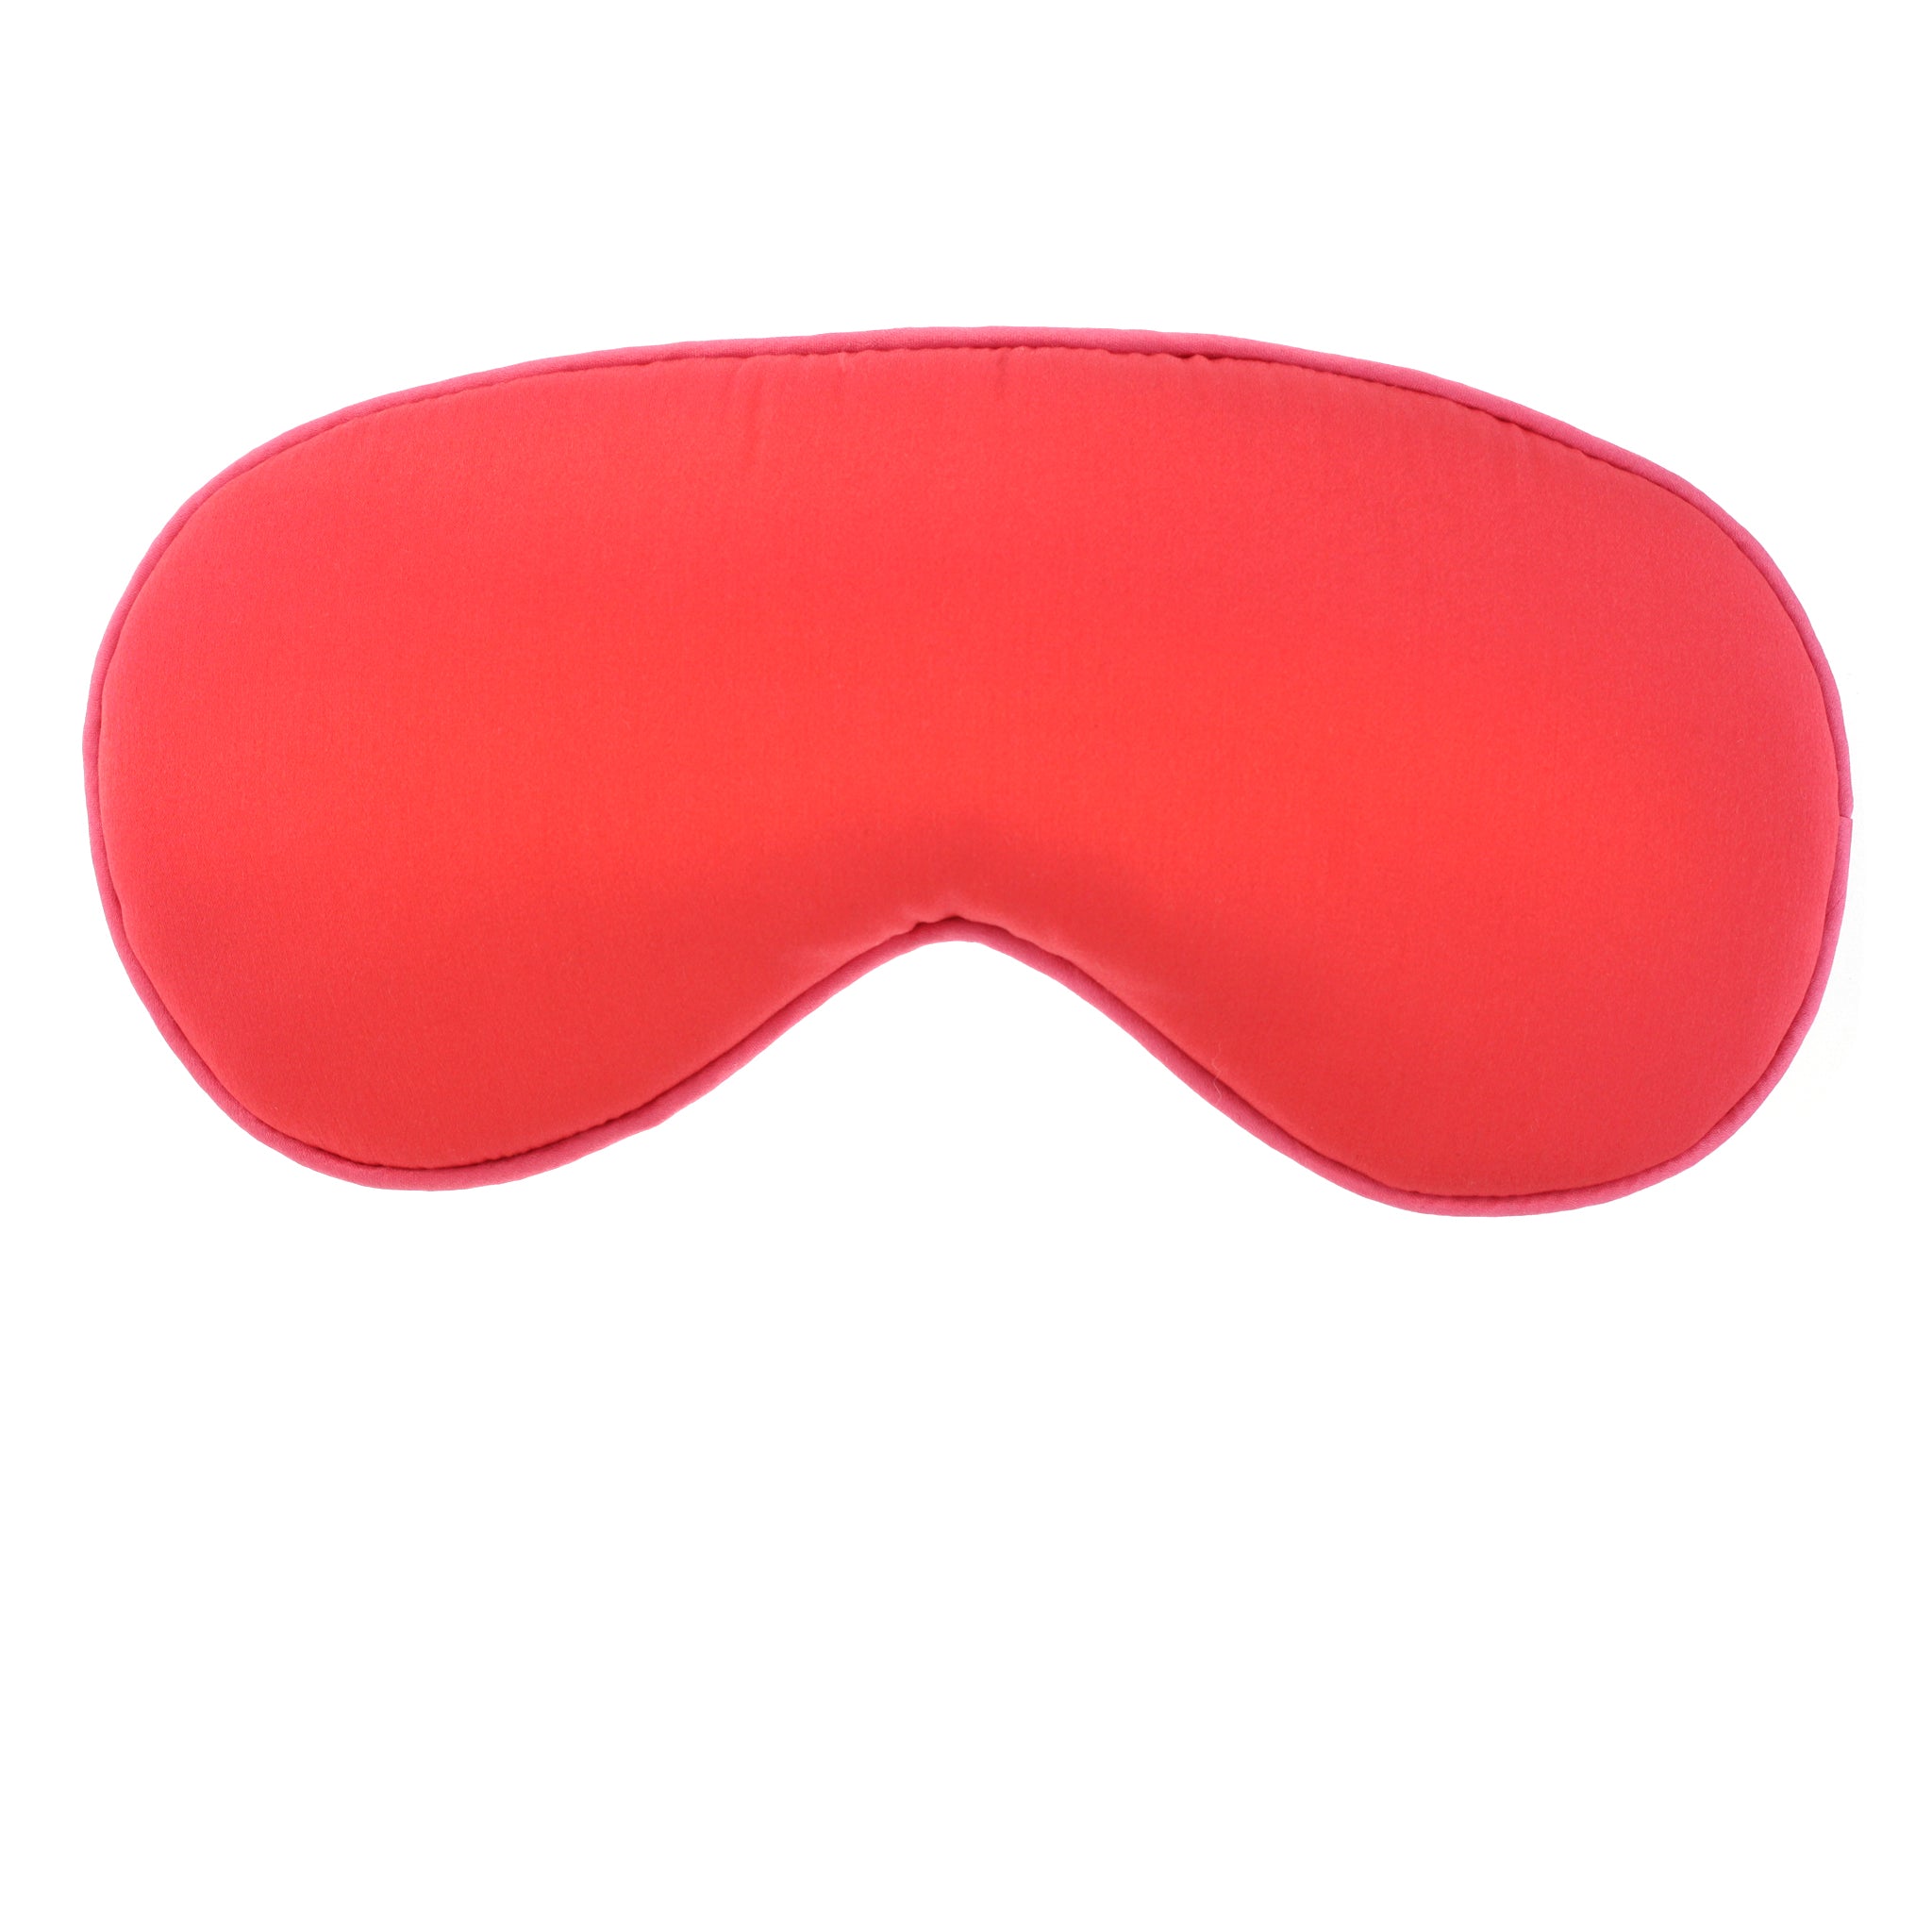 Hypnos Sleep Mask in Hibiscus Silk Charmeuse with Watermelon Trim